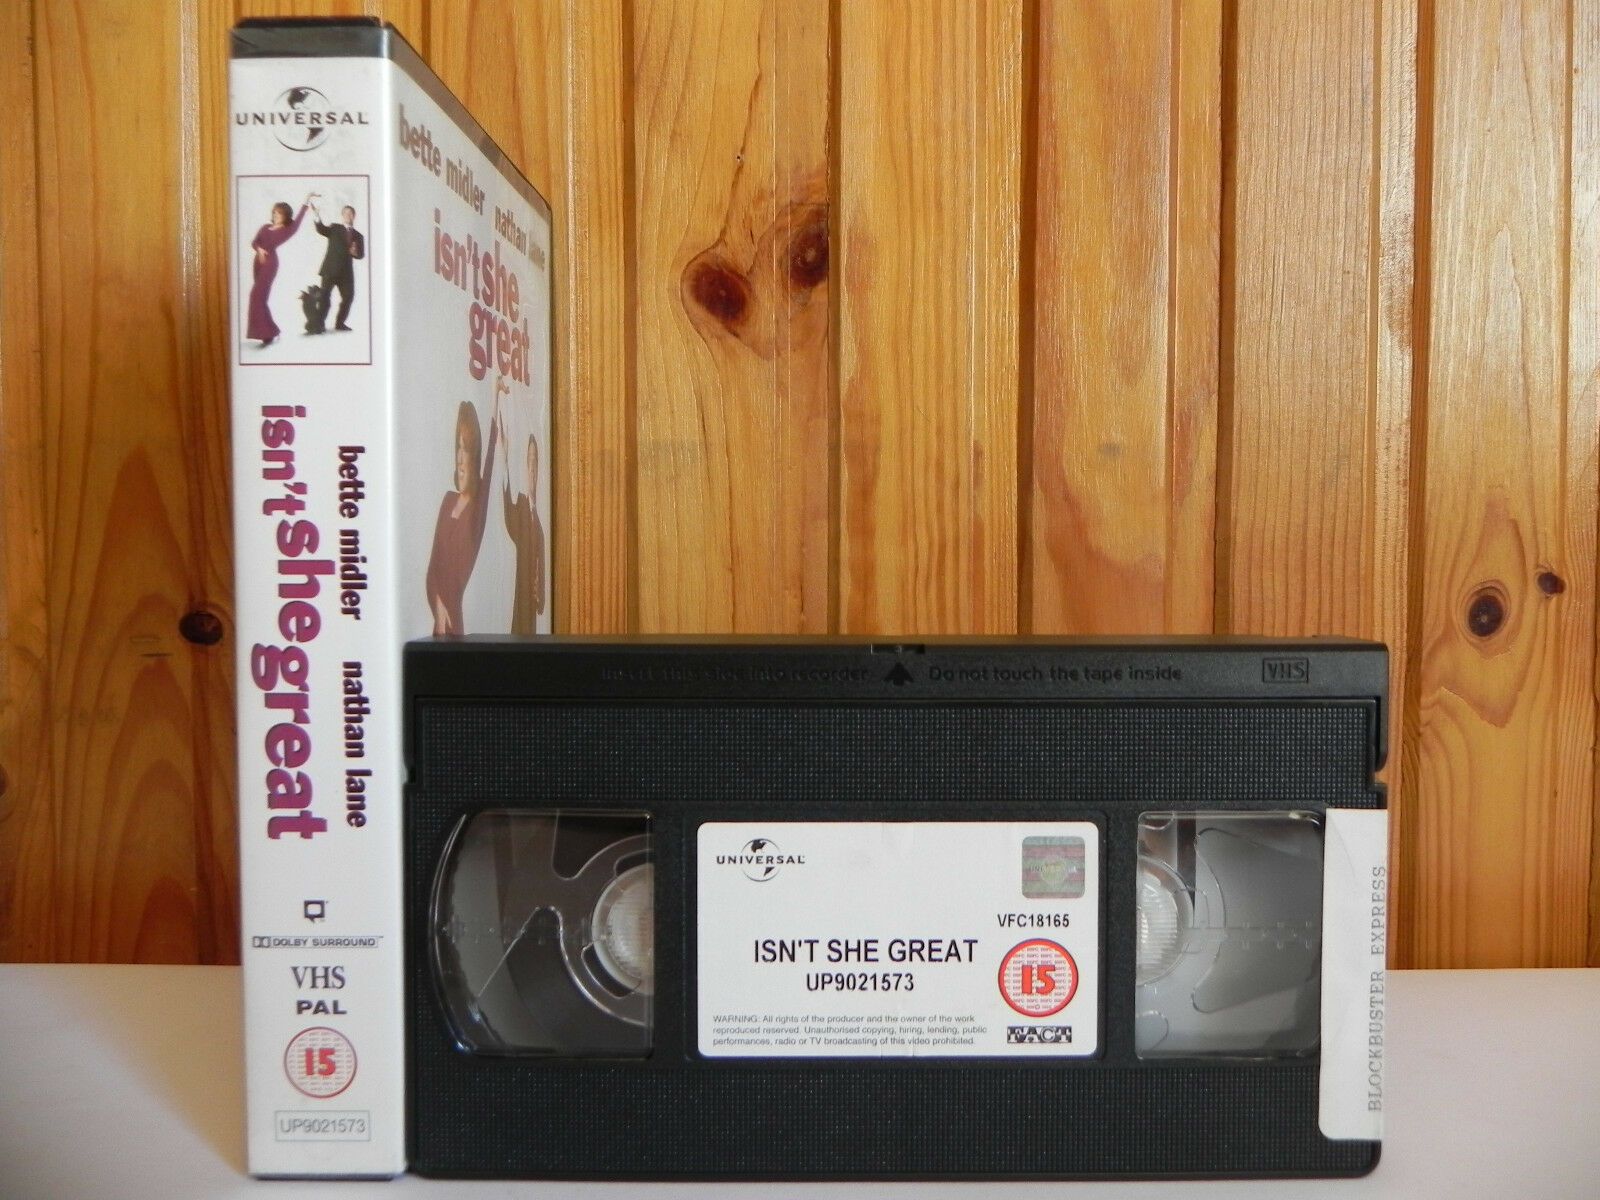 Isn't She Great - Universal Comedy - Bette Midler - Large Box Rental - Pal VHS-